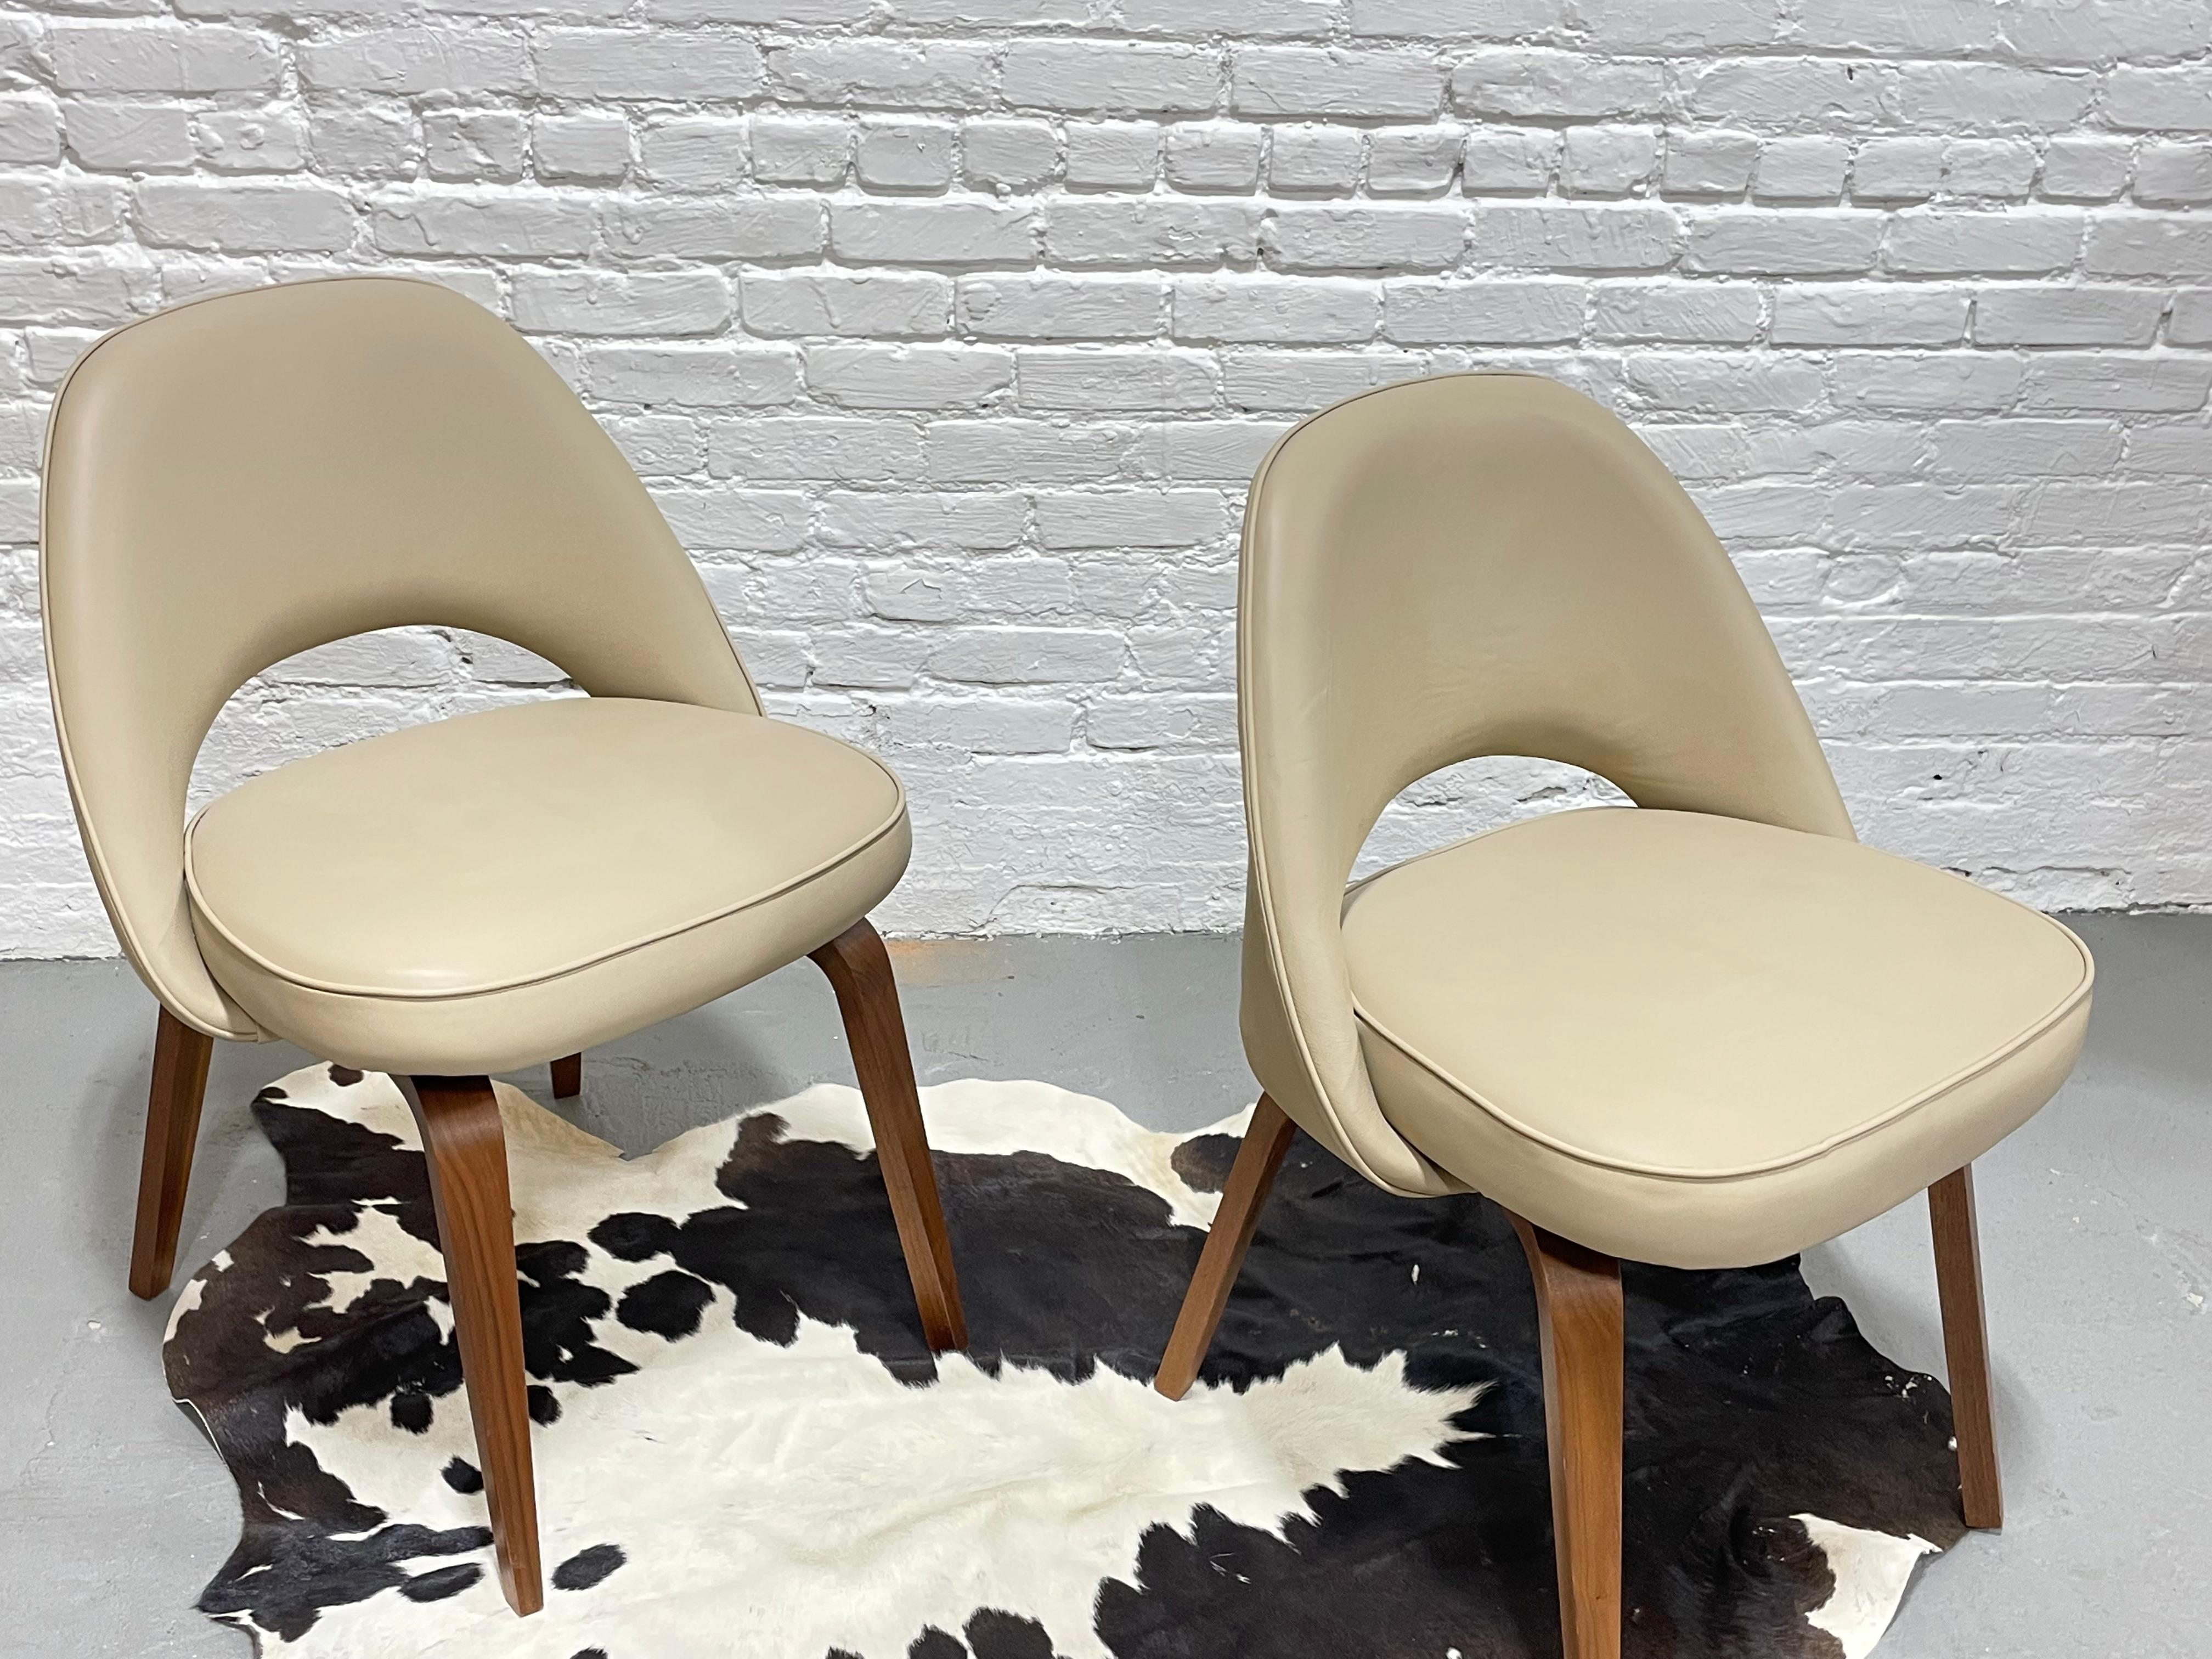 Late 20th Century Mid-Century Modern Saarinen Styled Side Chairs, a Pair For Sale